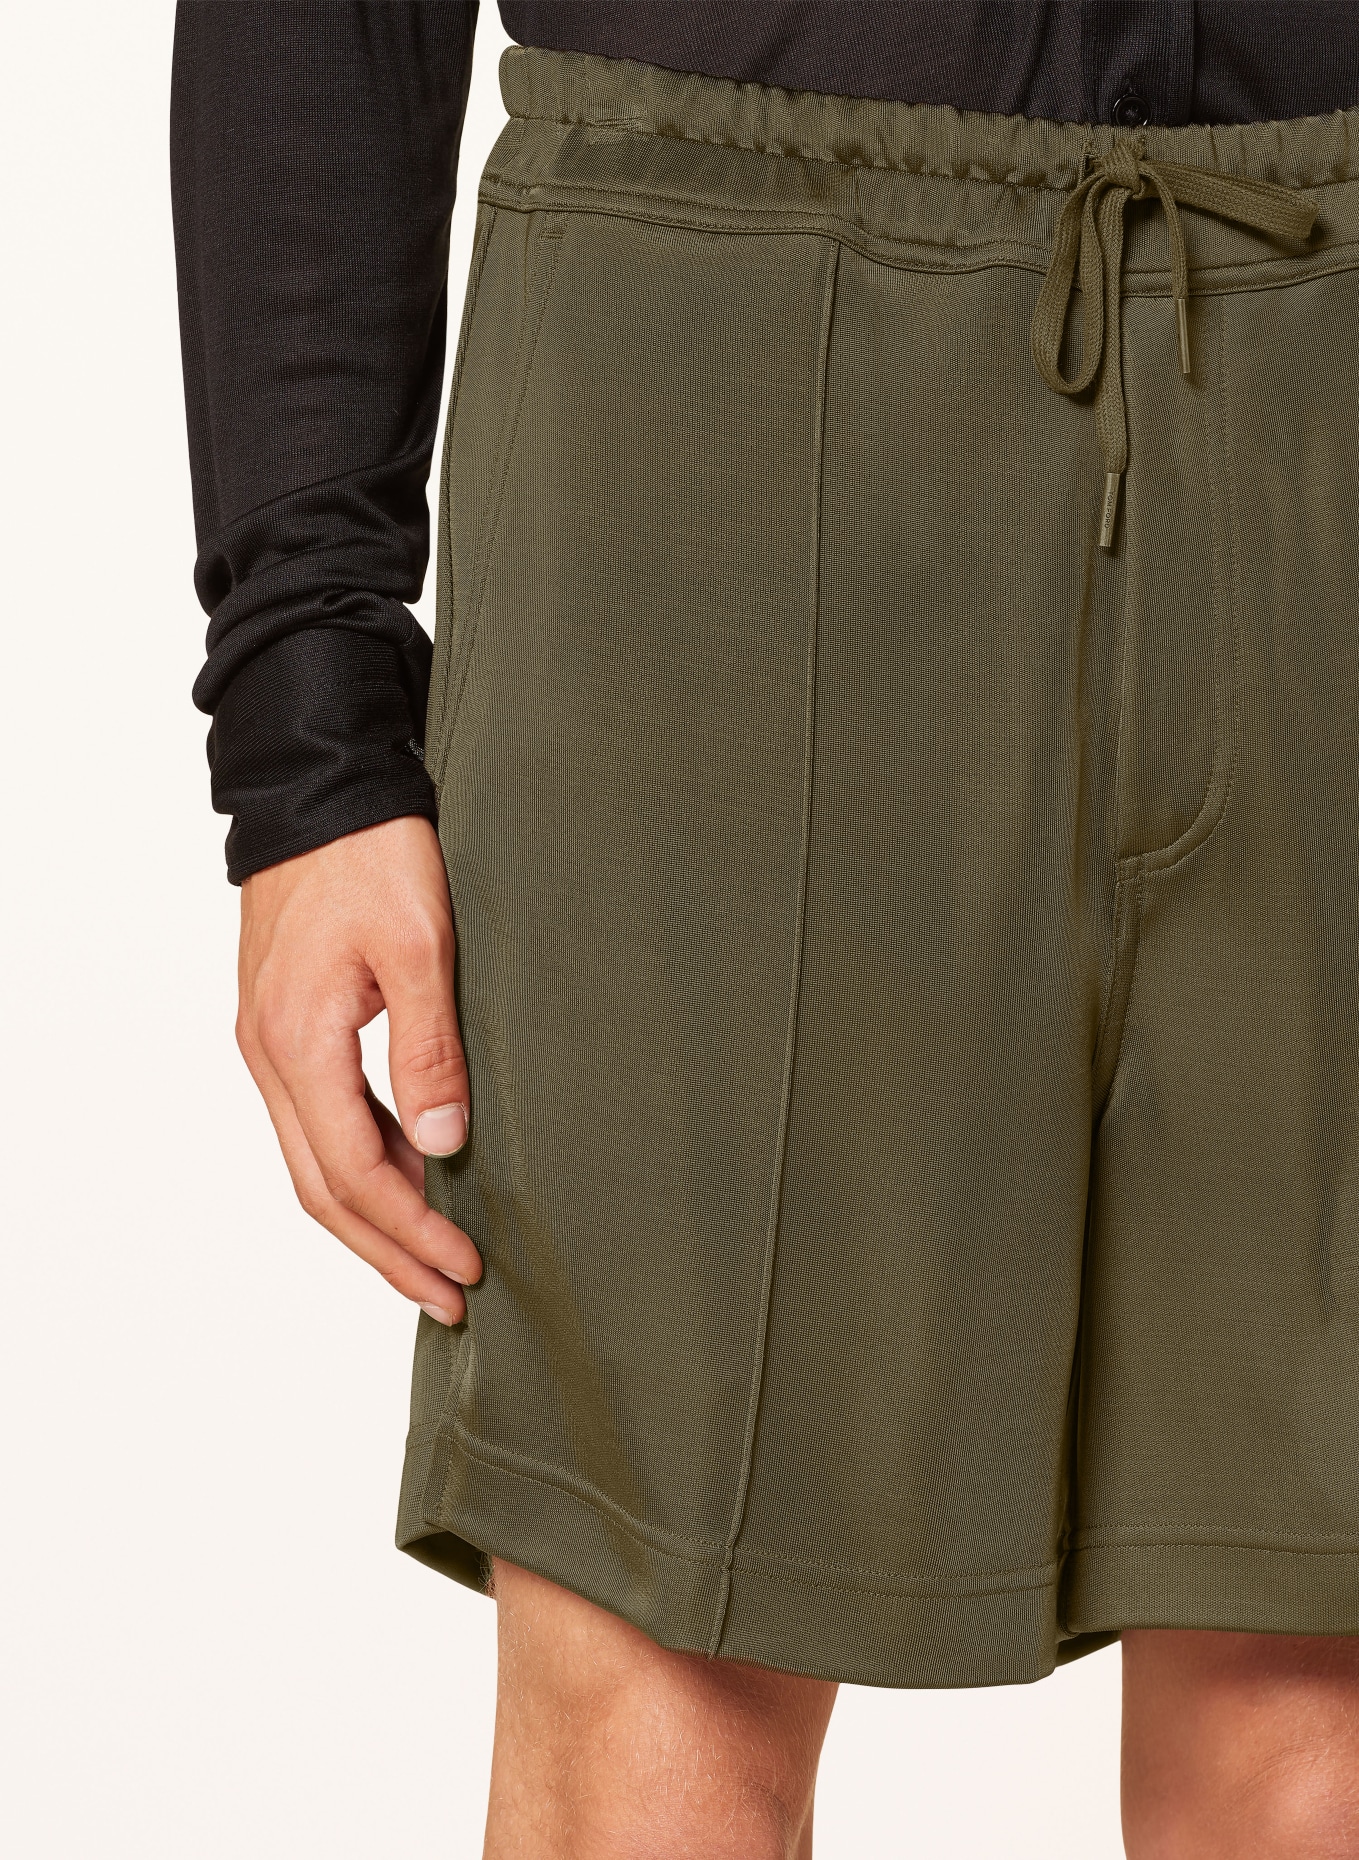 TOM FORD Shorts in jogger style, Color: KHAKI (Image 5)